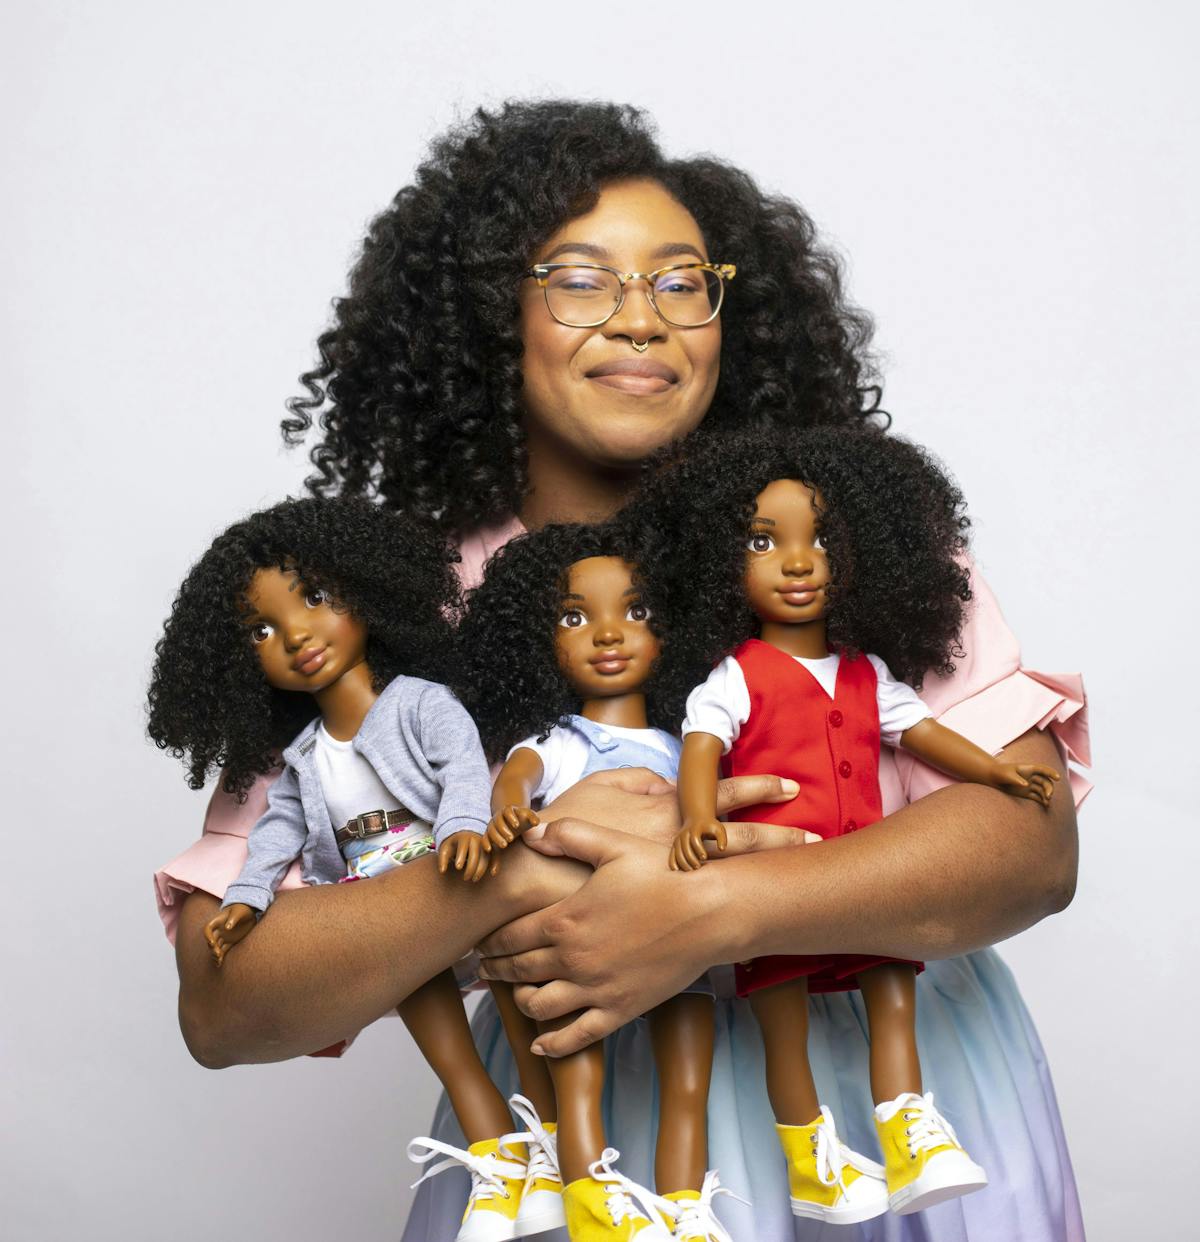 Female Founder of Healthy Roots Dolls, Yelitsa Jean-Charles. Natural curls.